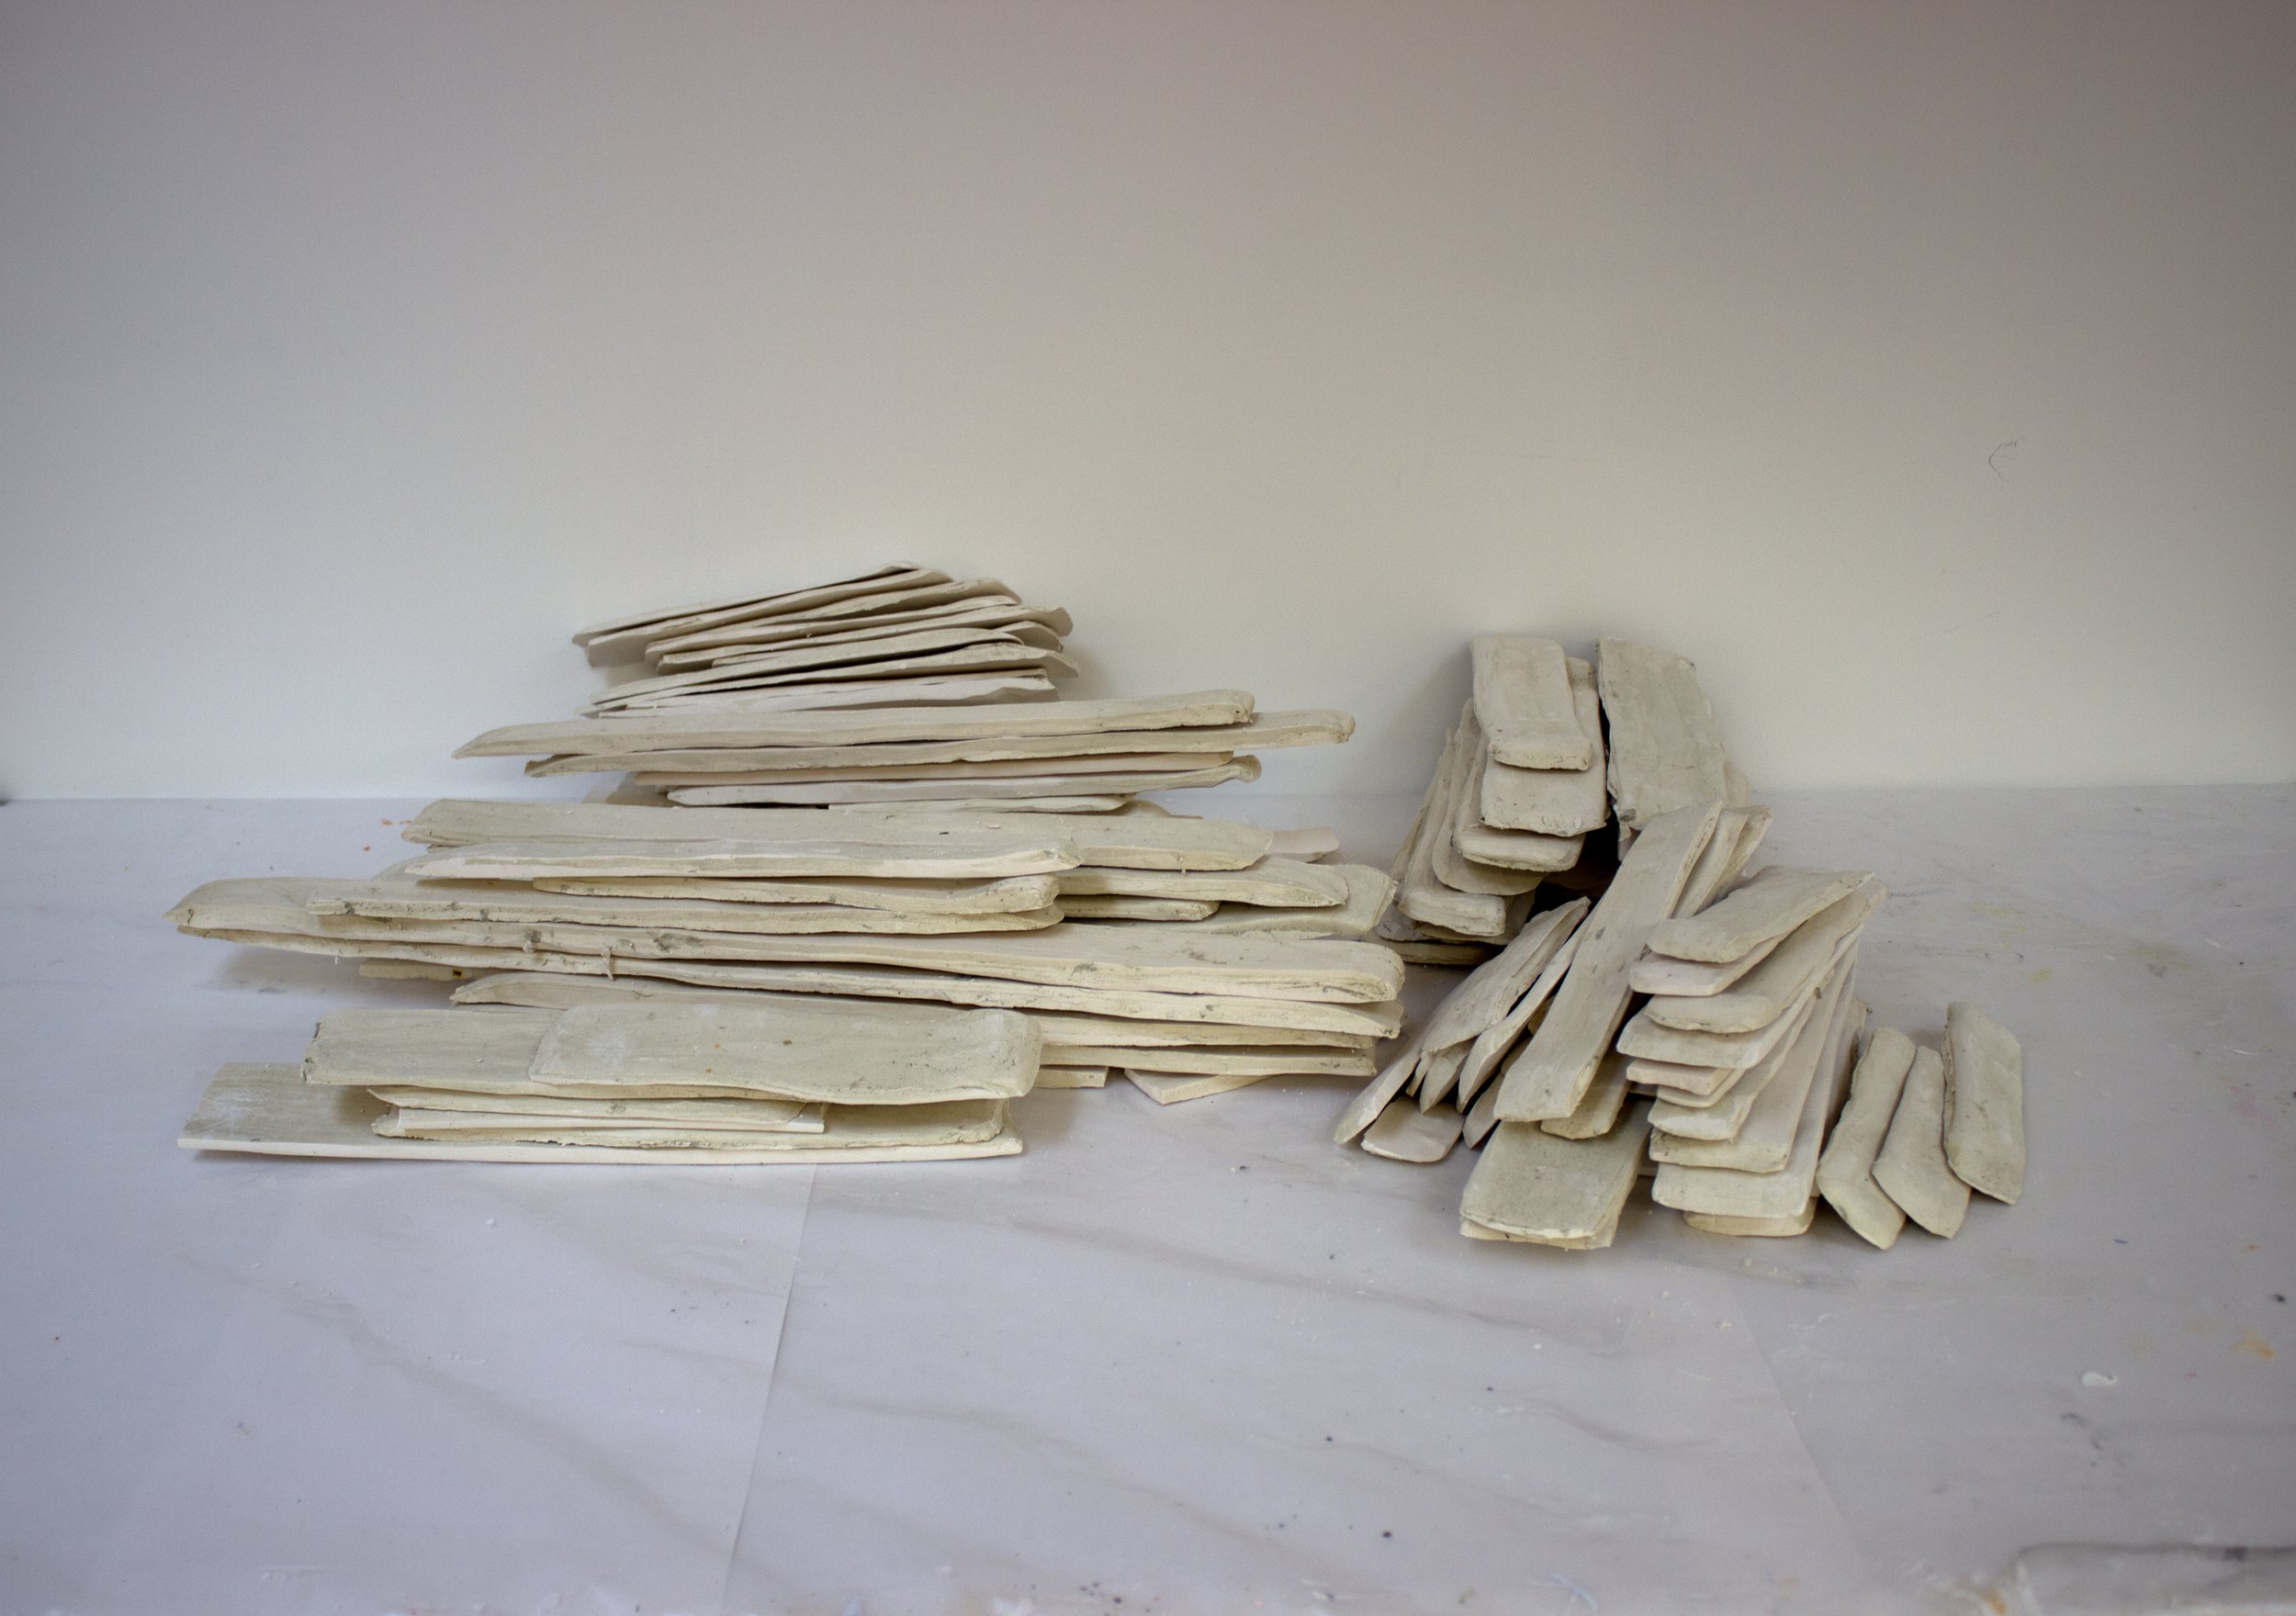 M. B. O’Toole, A Heap of Gestures, plaster, dimensions variable, 2014.